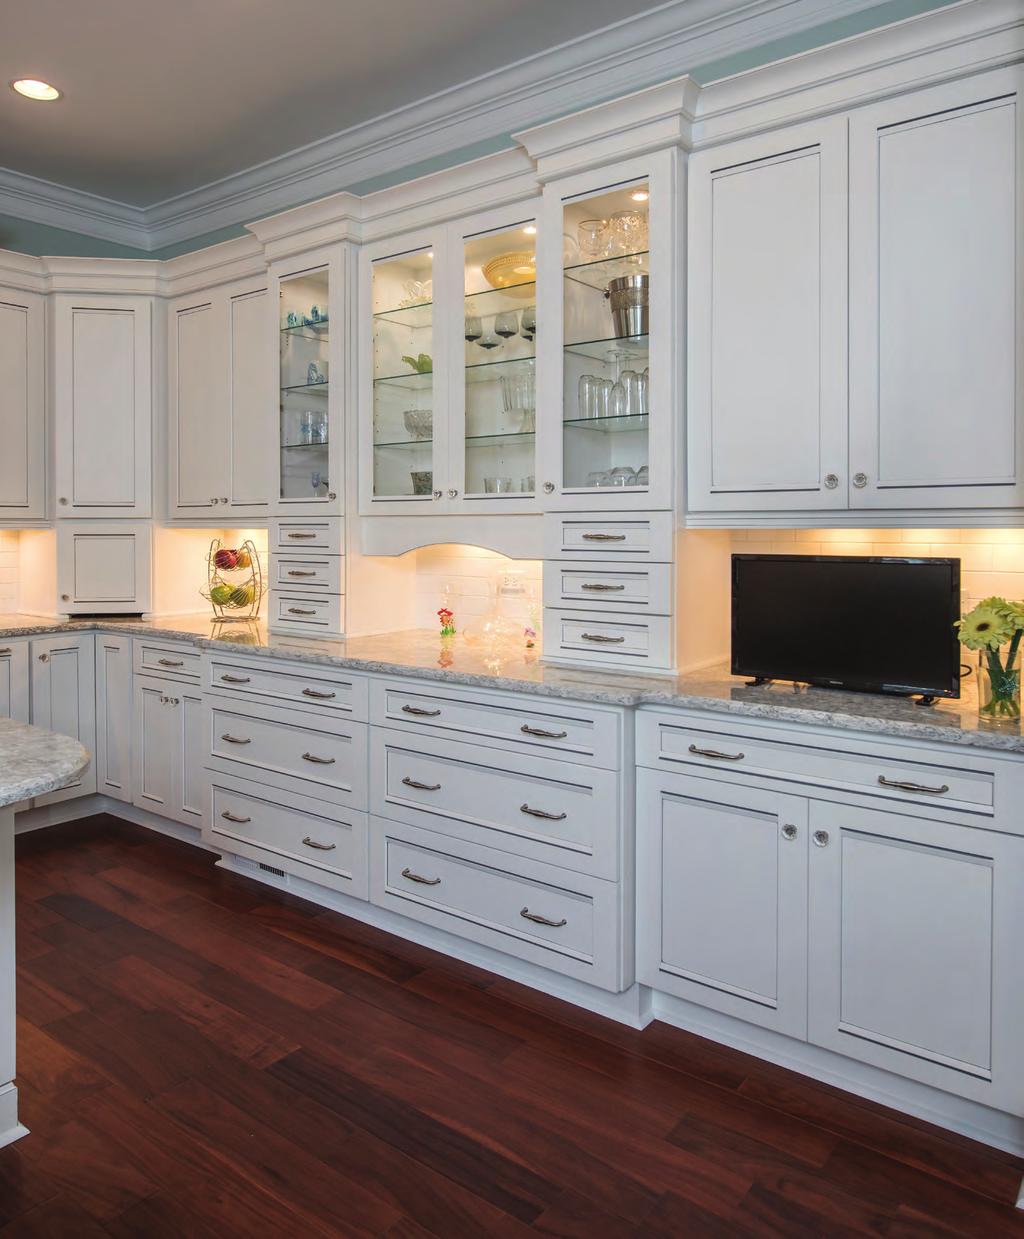 The kitchen offers lots of cabinet space for storage, and a